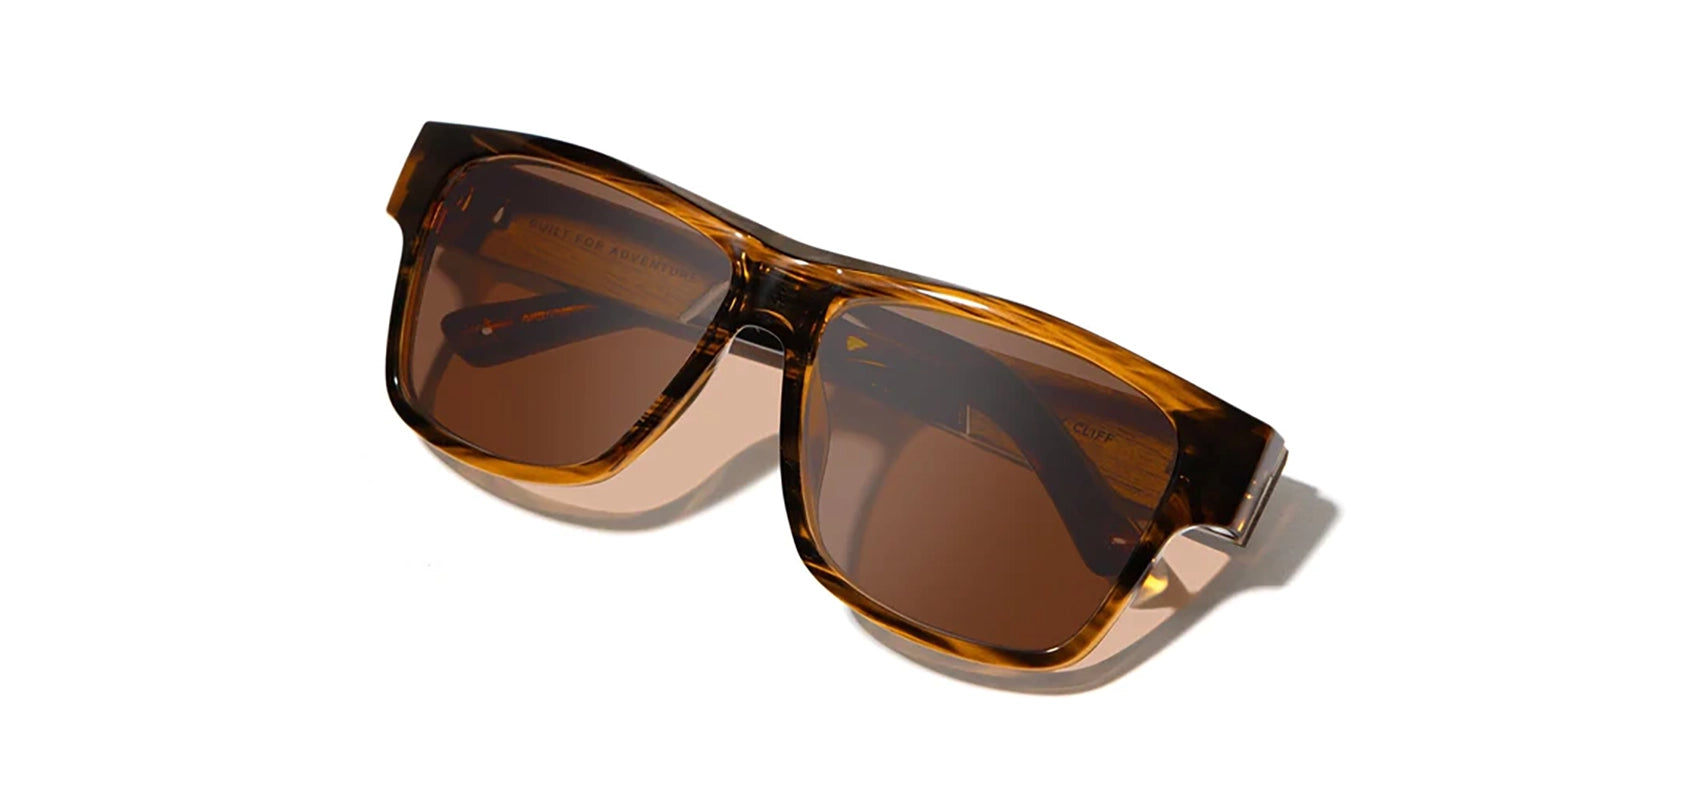 Shwood Camp - Cliff Sunglasses with Tortoise/walnut frames and Brown Polarized lenses, front angled closed temple view